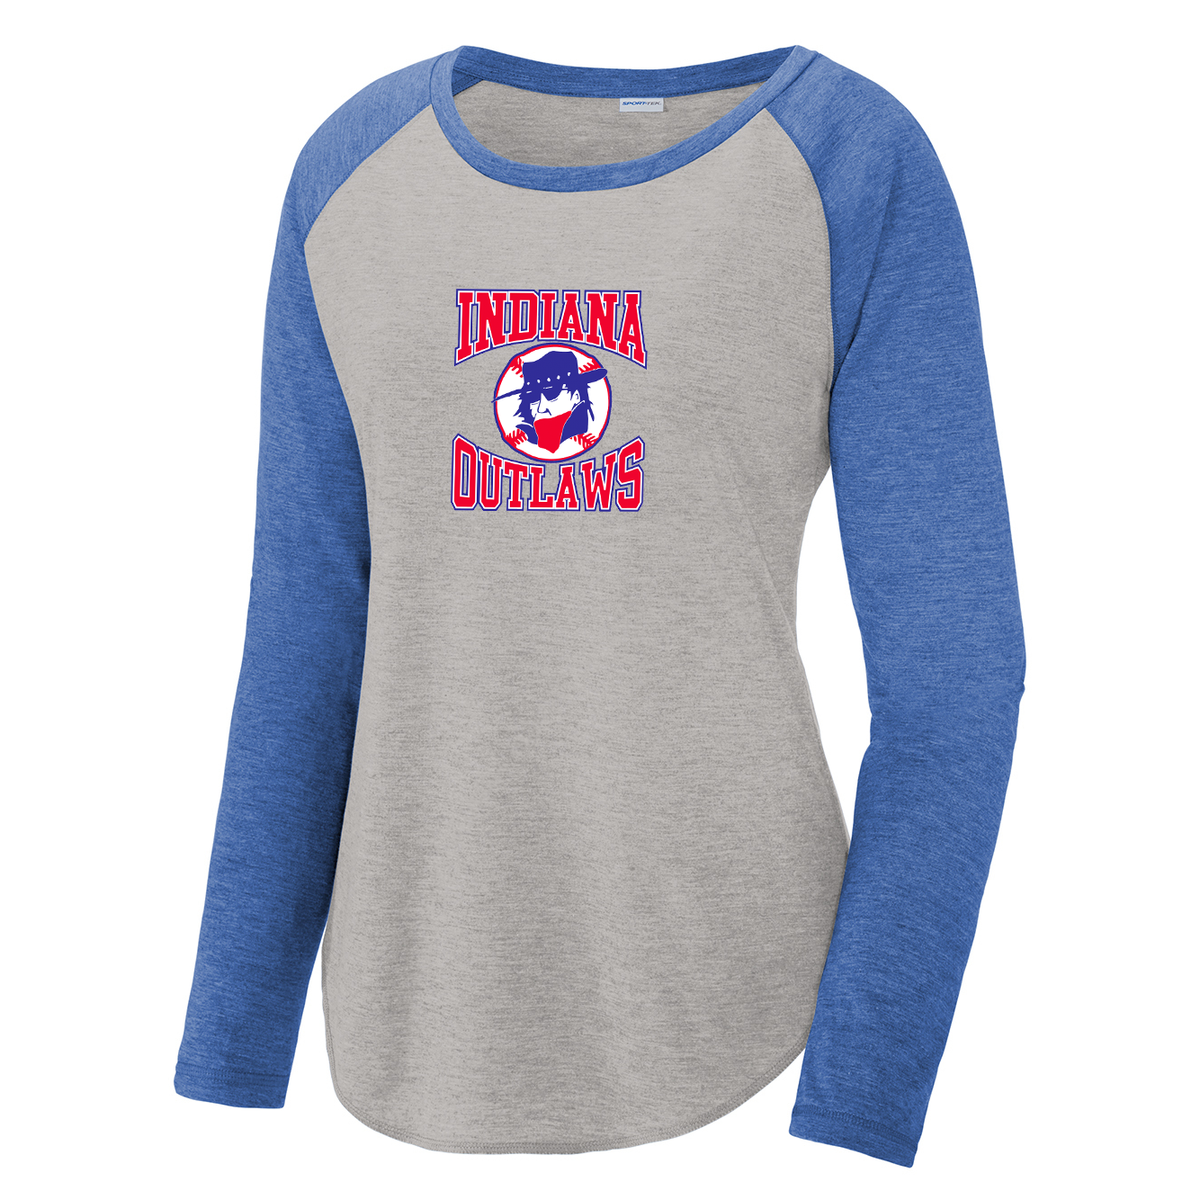 Southern Indiana Outlaws Baseball Women's Raglan Long Sleeve Cotton Touch